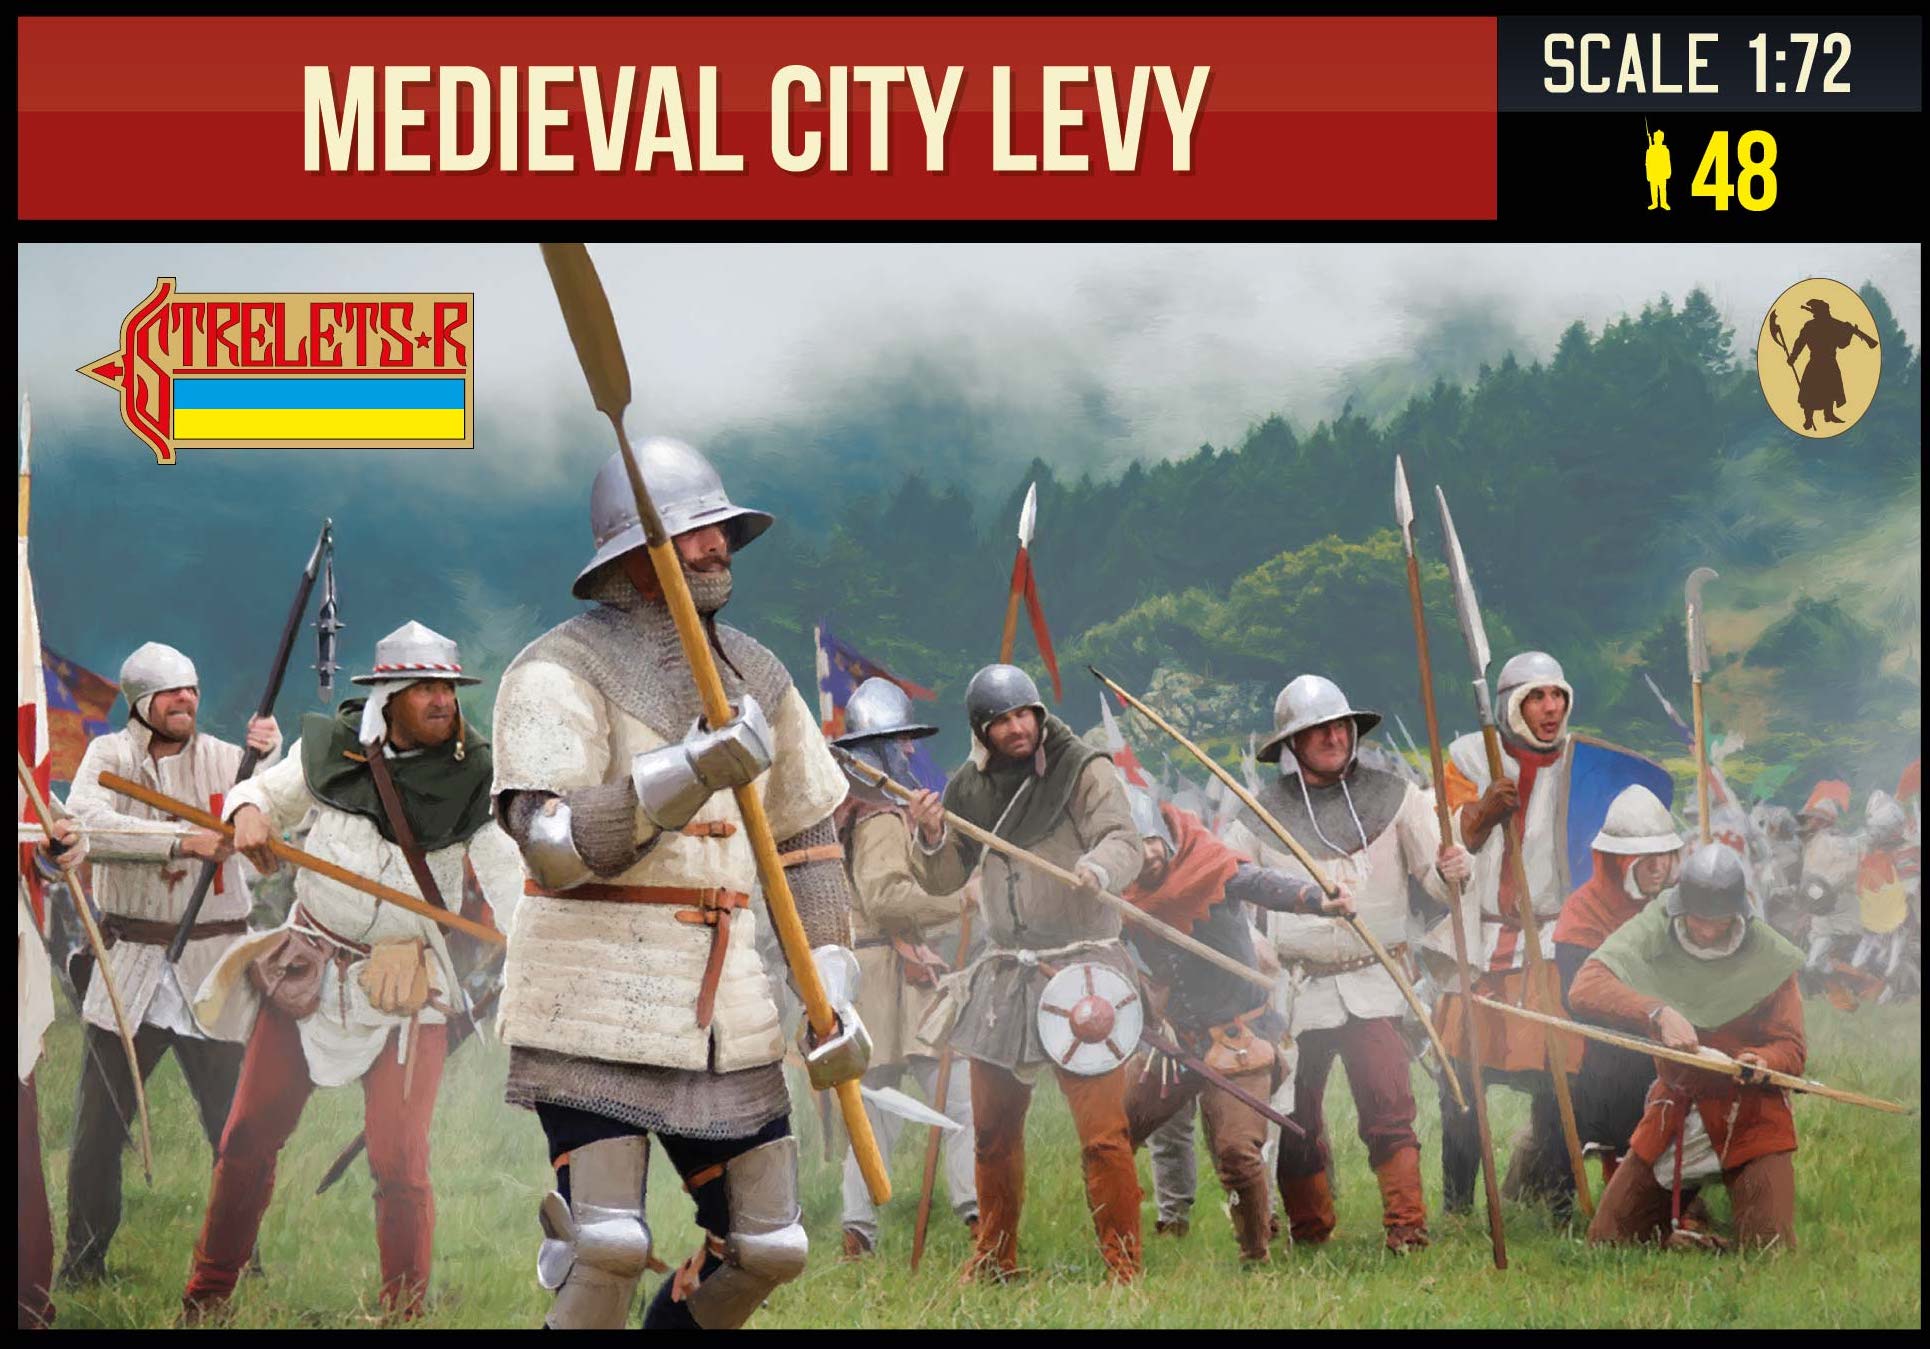 Medieval City Levy